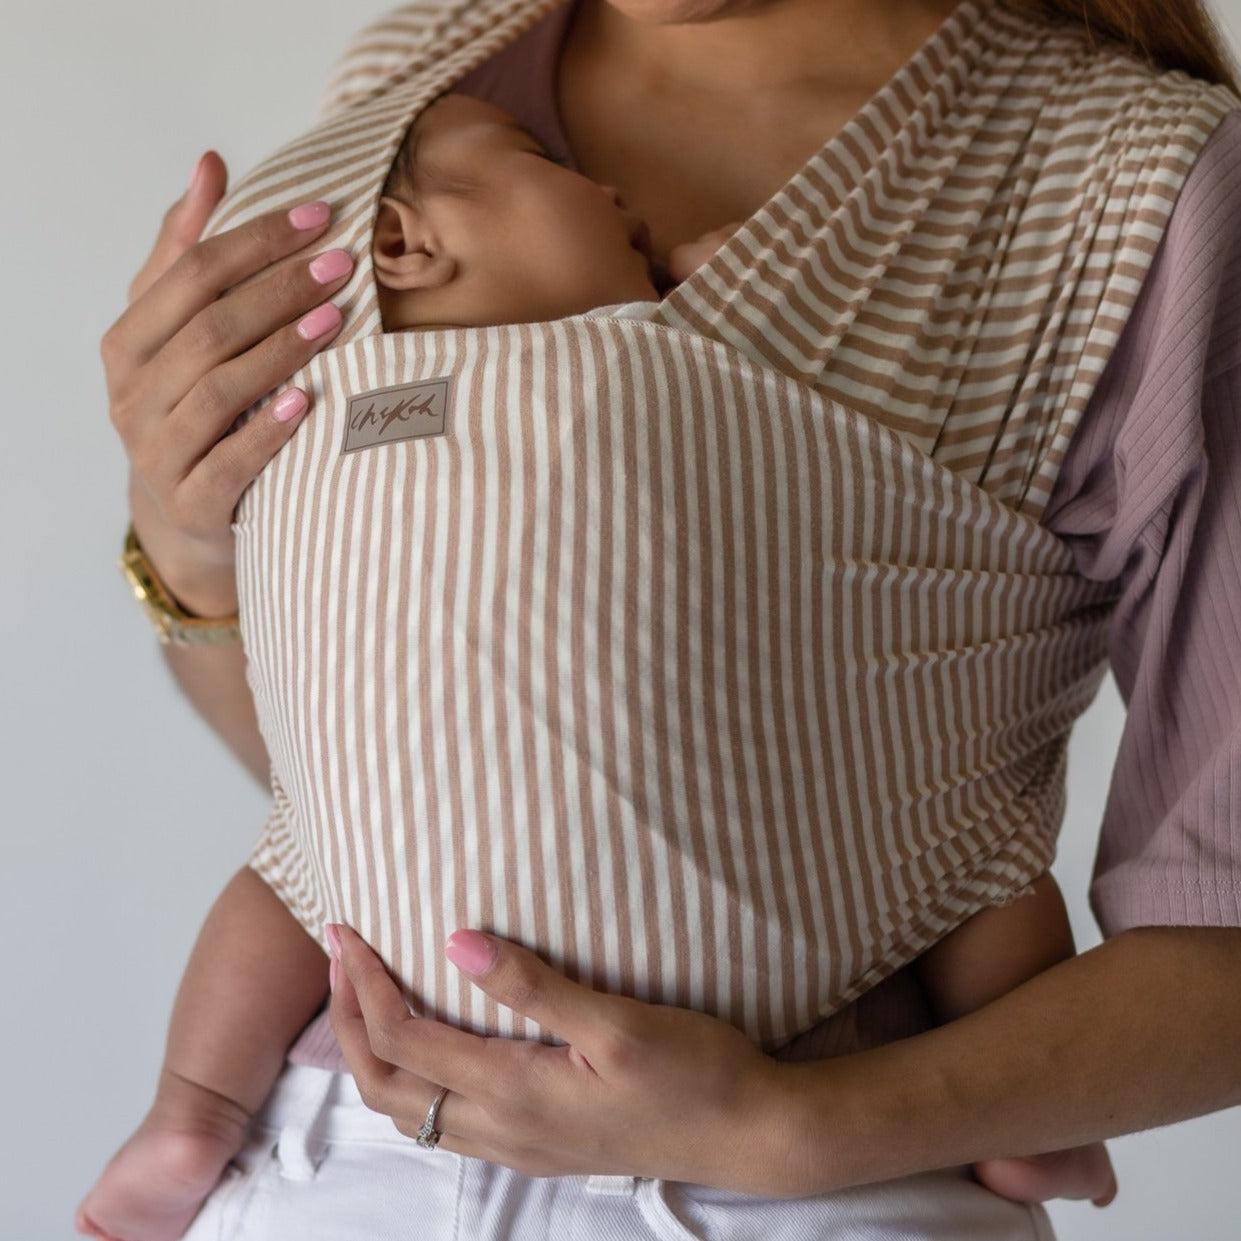 A woman holding a baby in a Cinta Stripe Wrap by Chekoh.